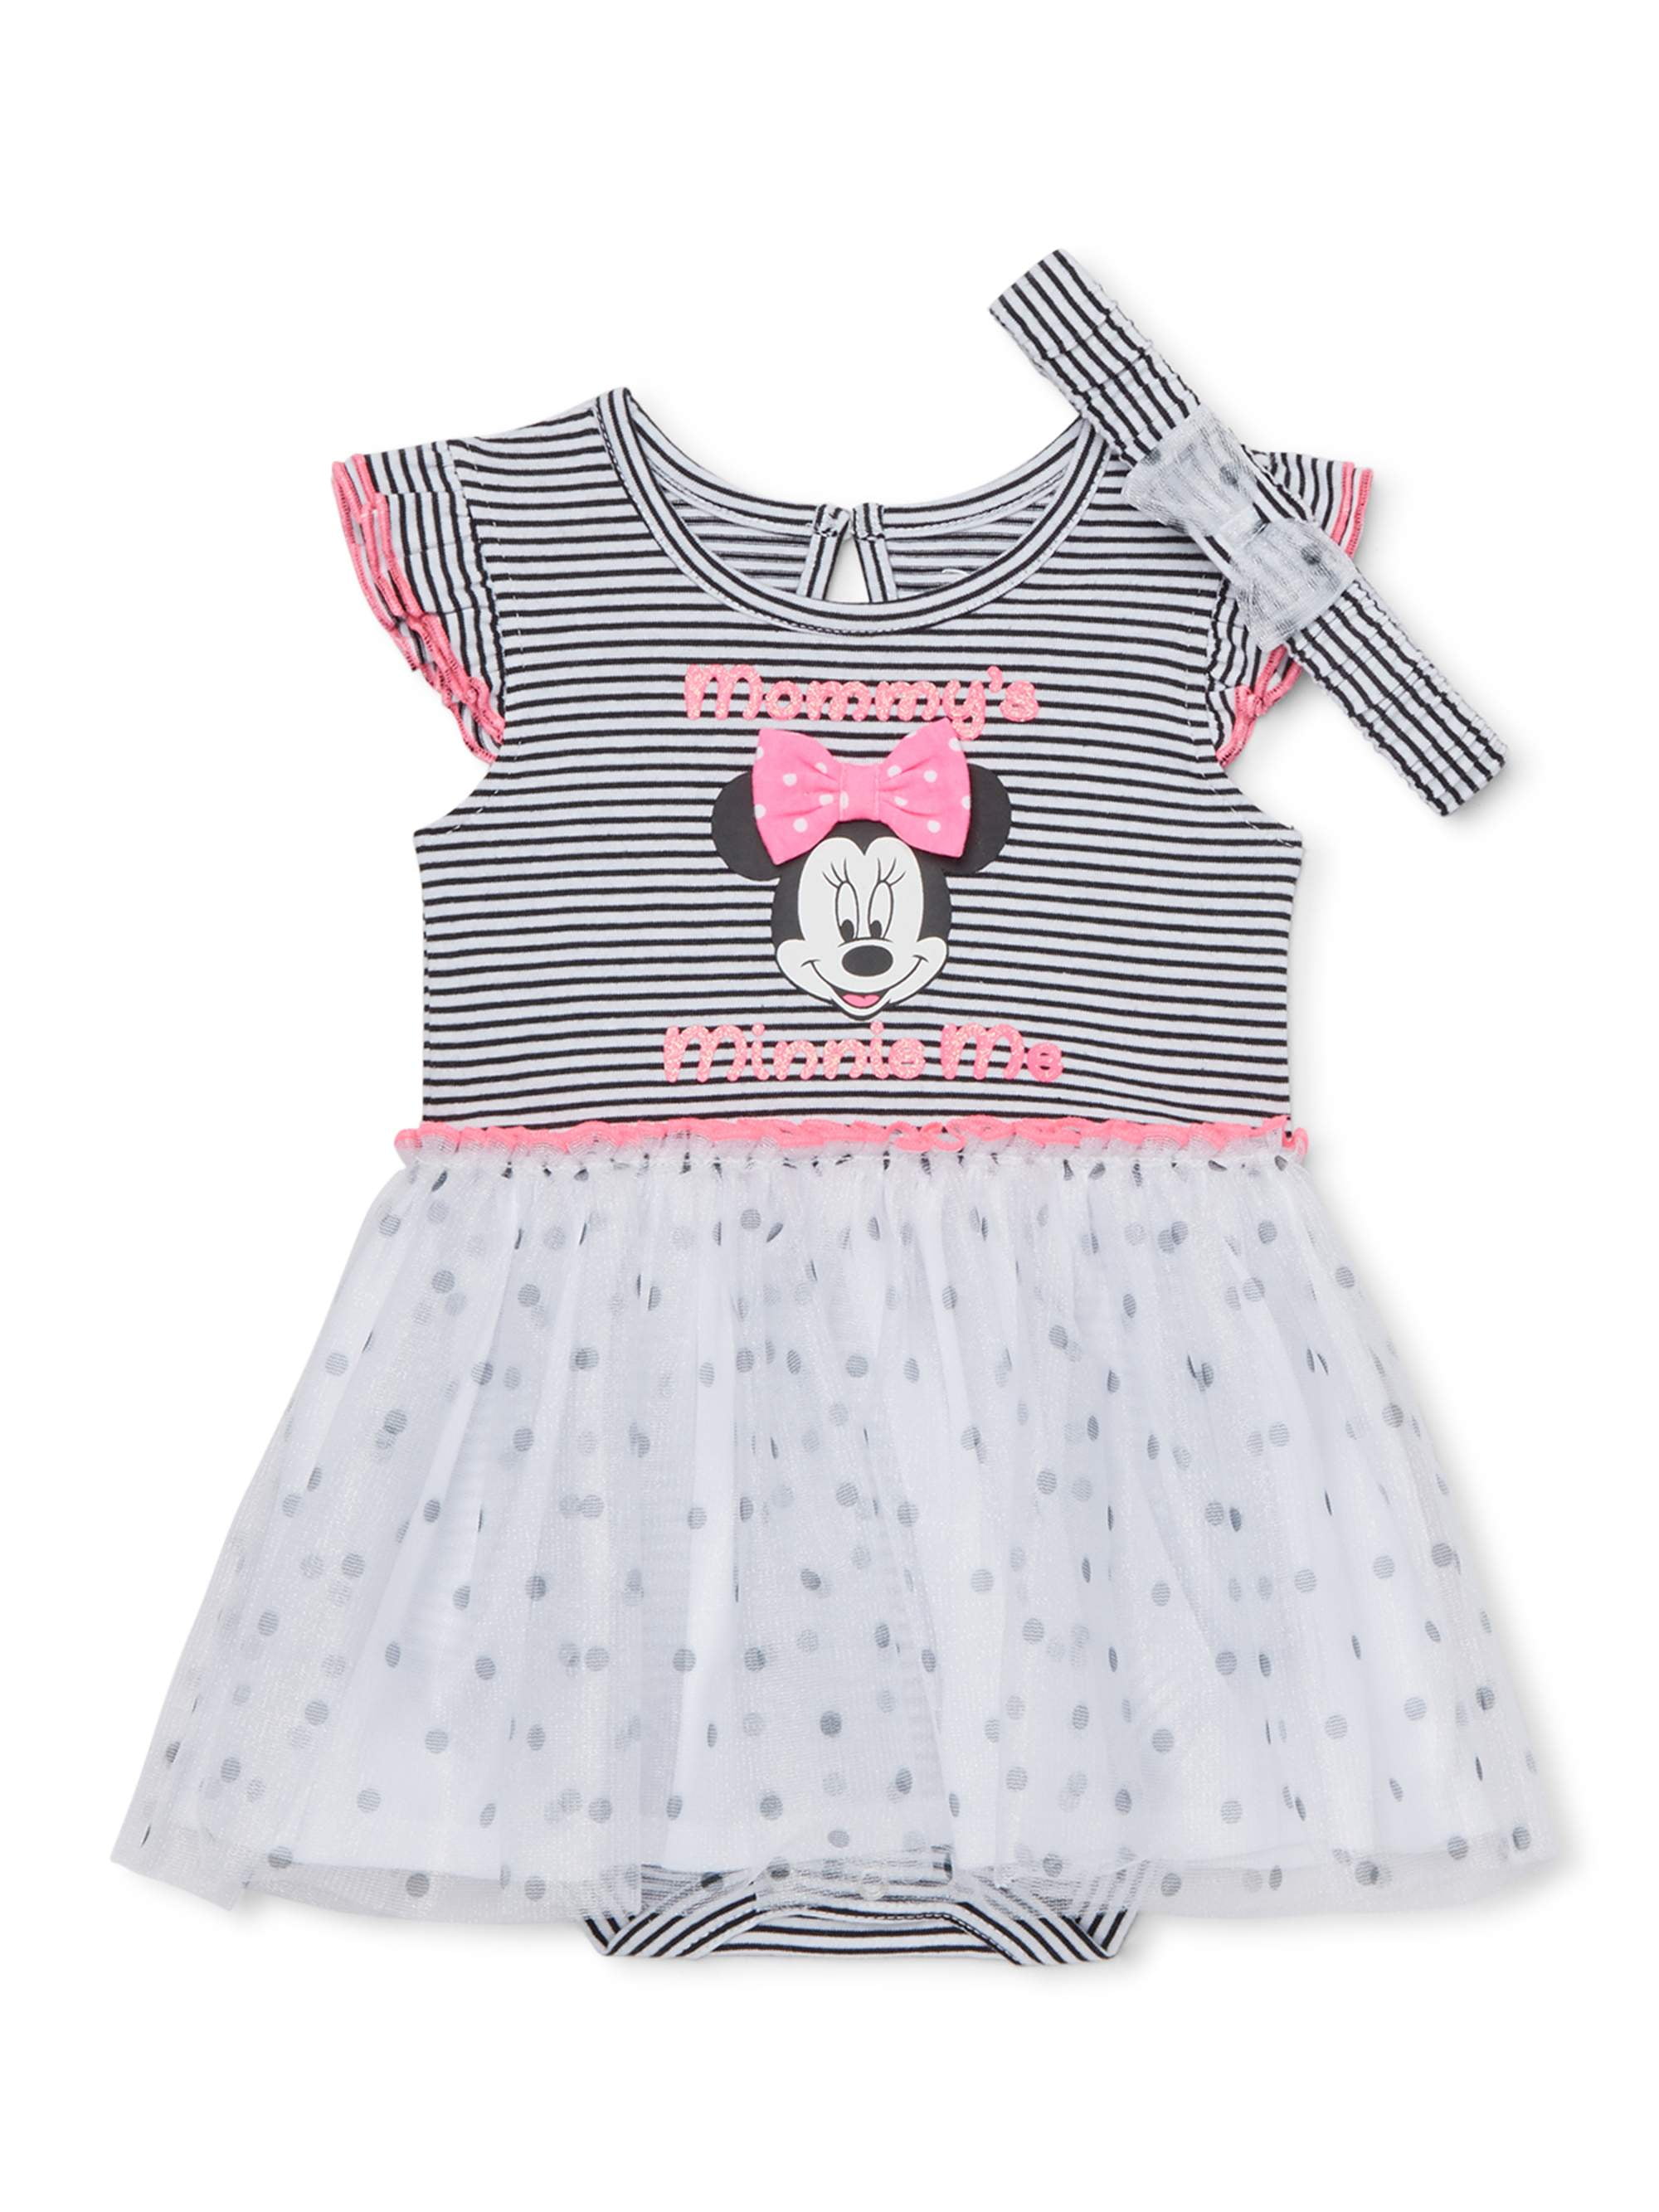 minnie mouse baby tutu outfit